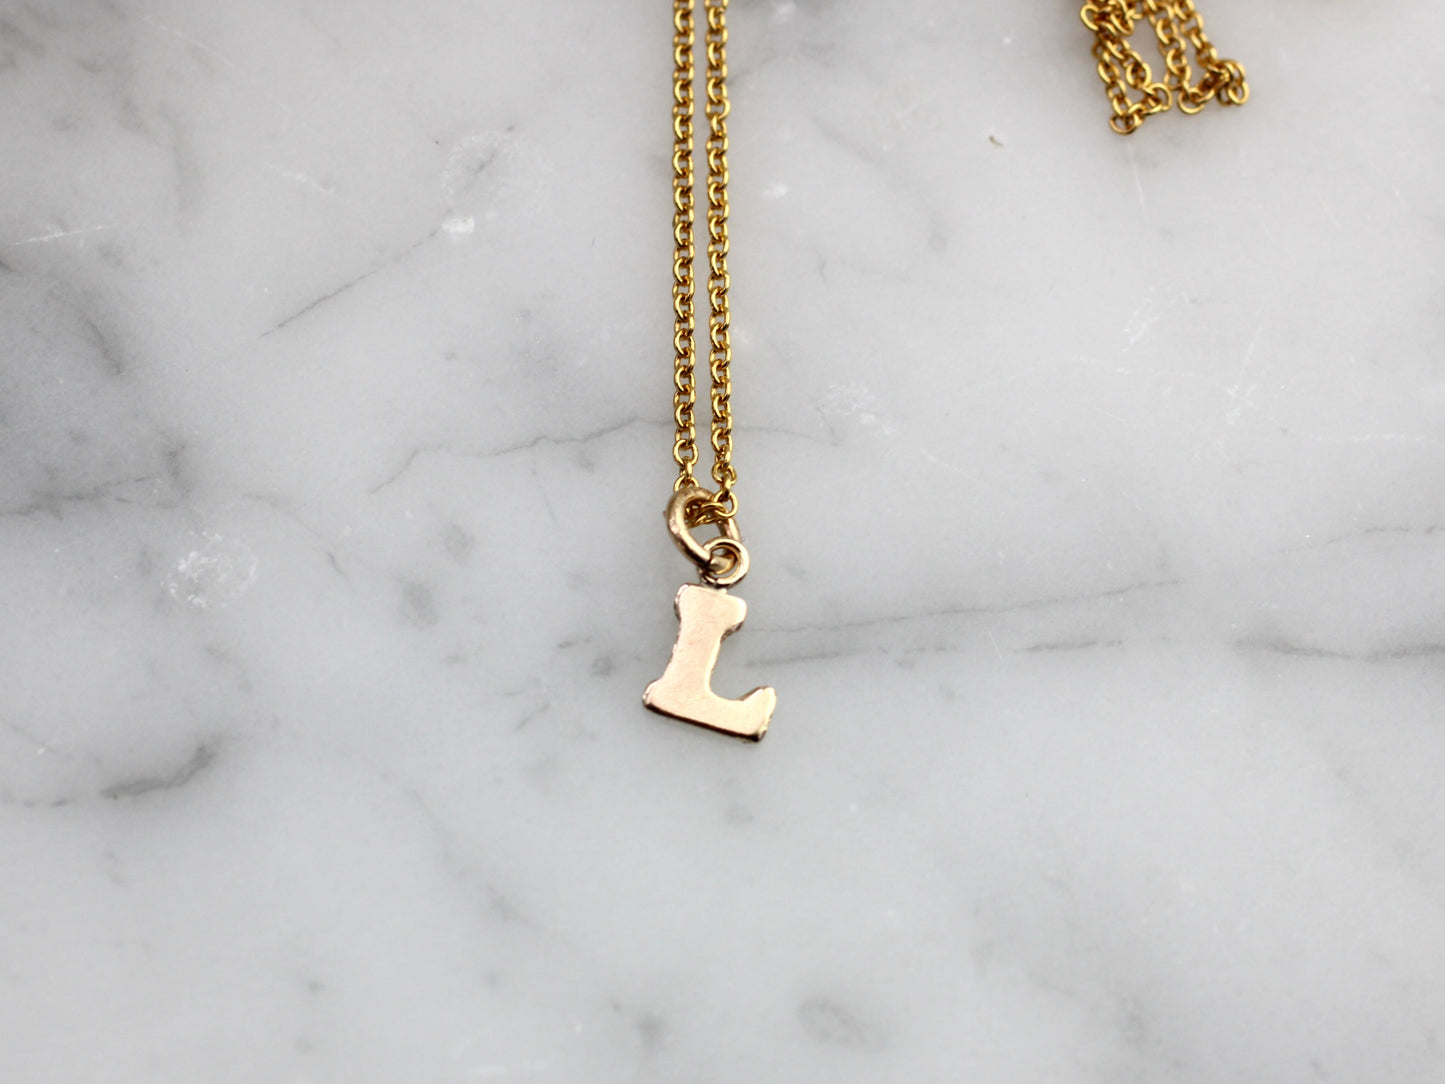 Gold initial necklace.